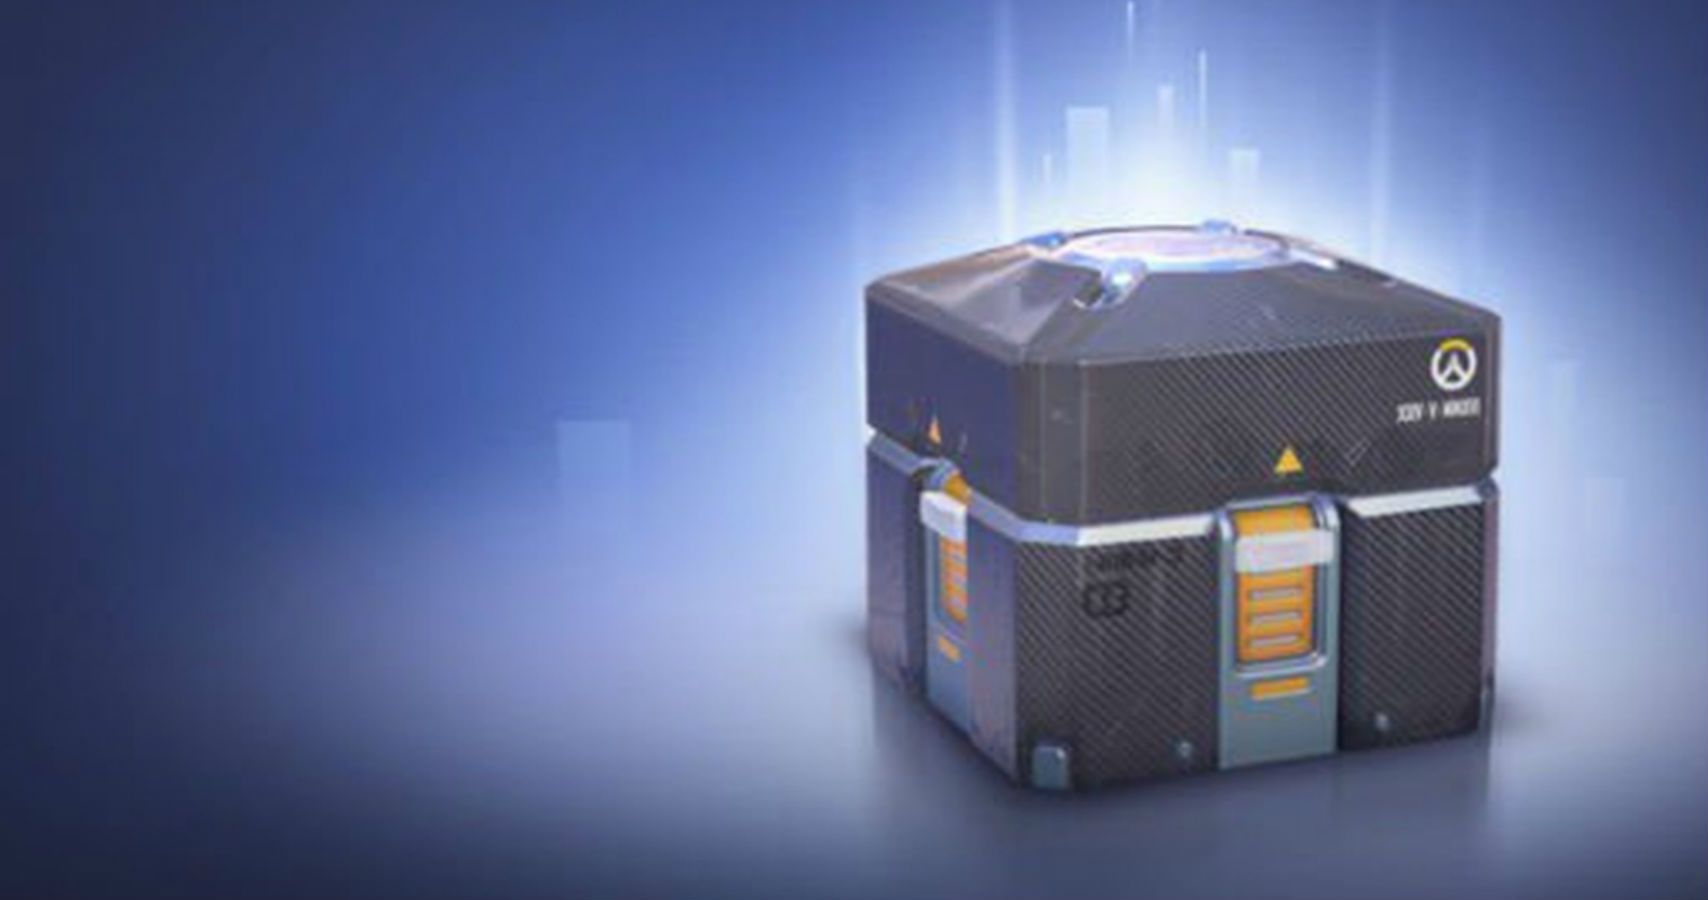 Canadian Class Action Lawsuit Targets EA Over InGame Loot Boxes